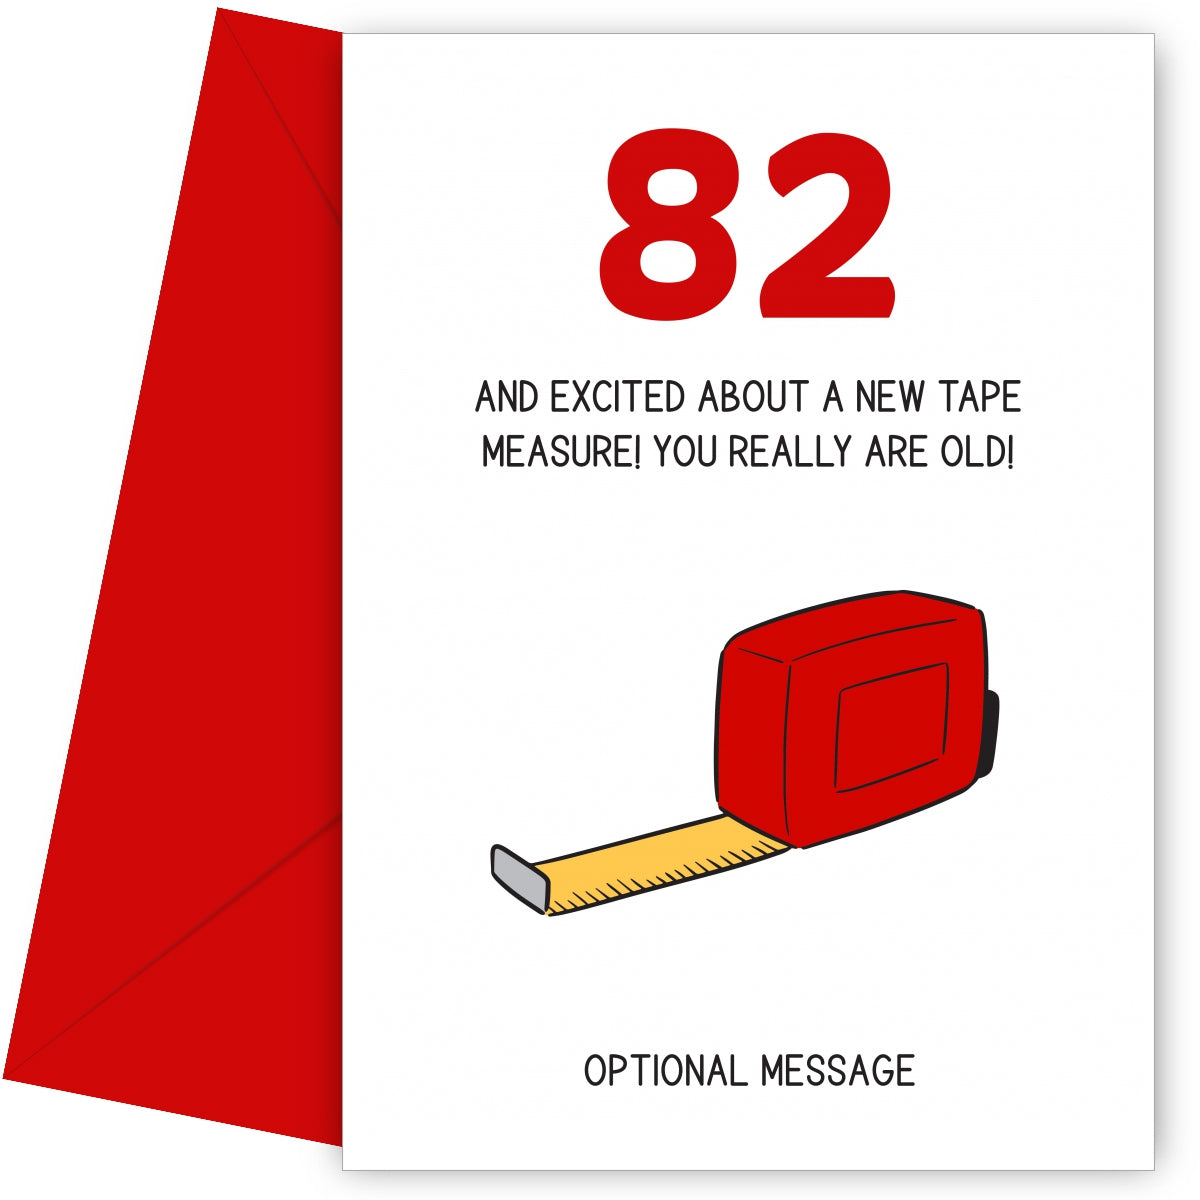 Happy 82nd Birthday Card - Excited About Tape Measure!